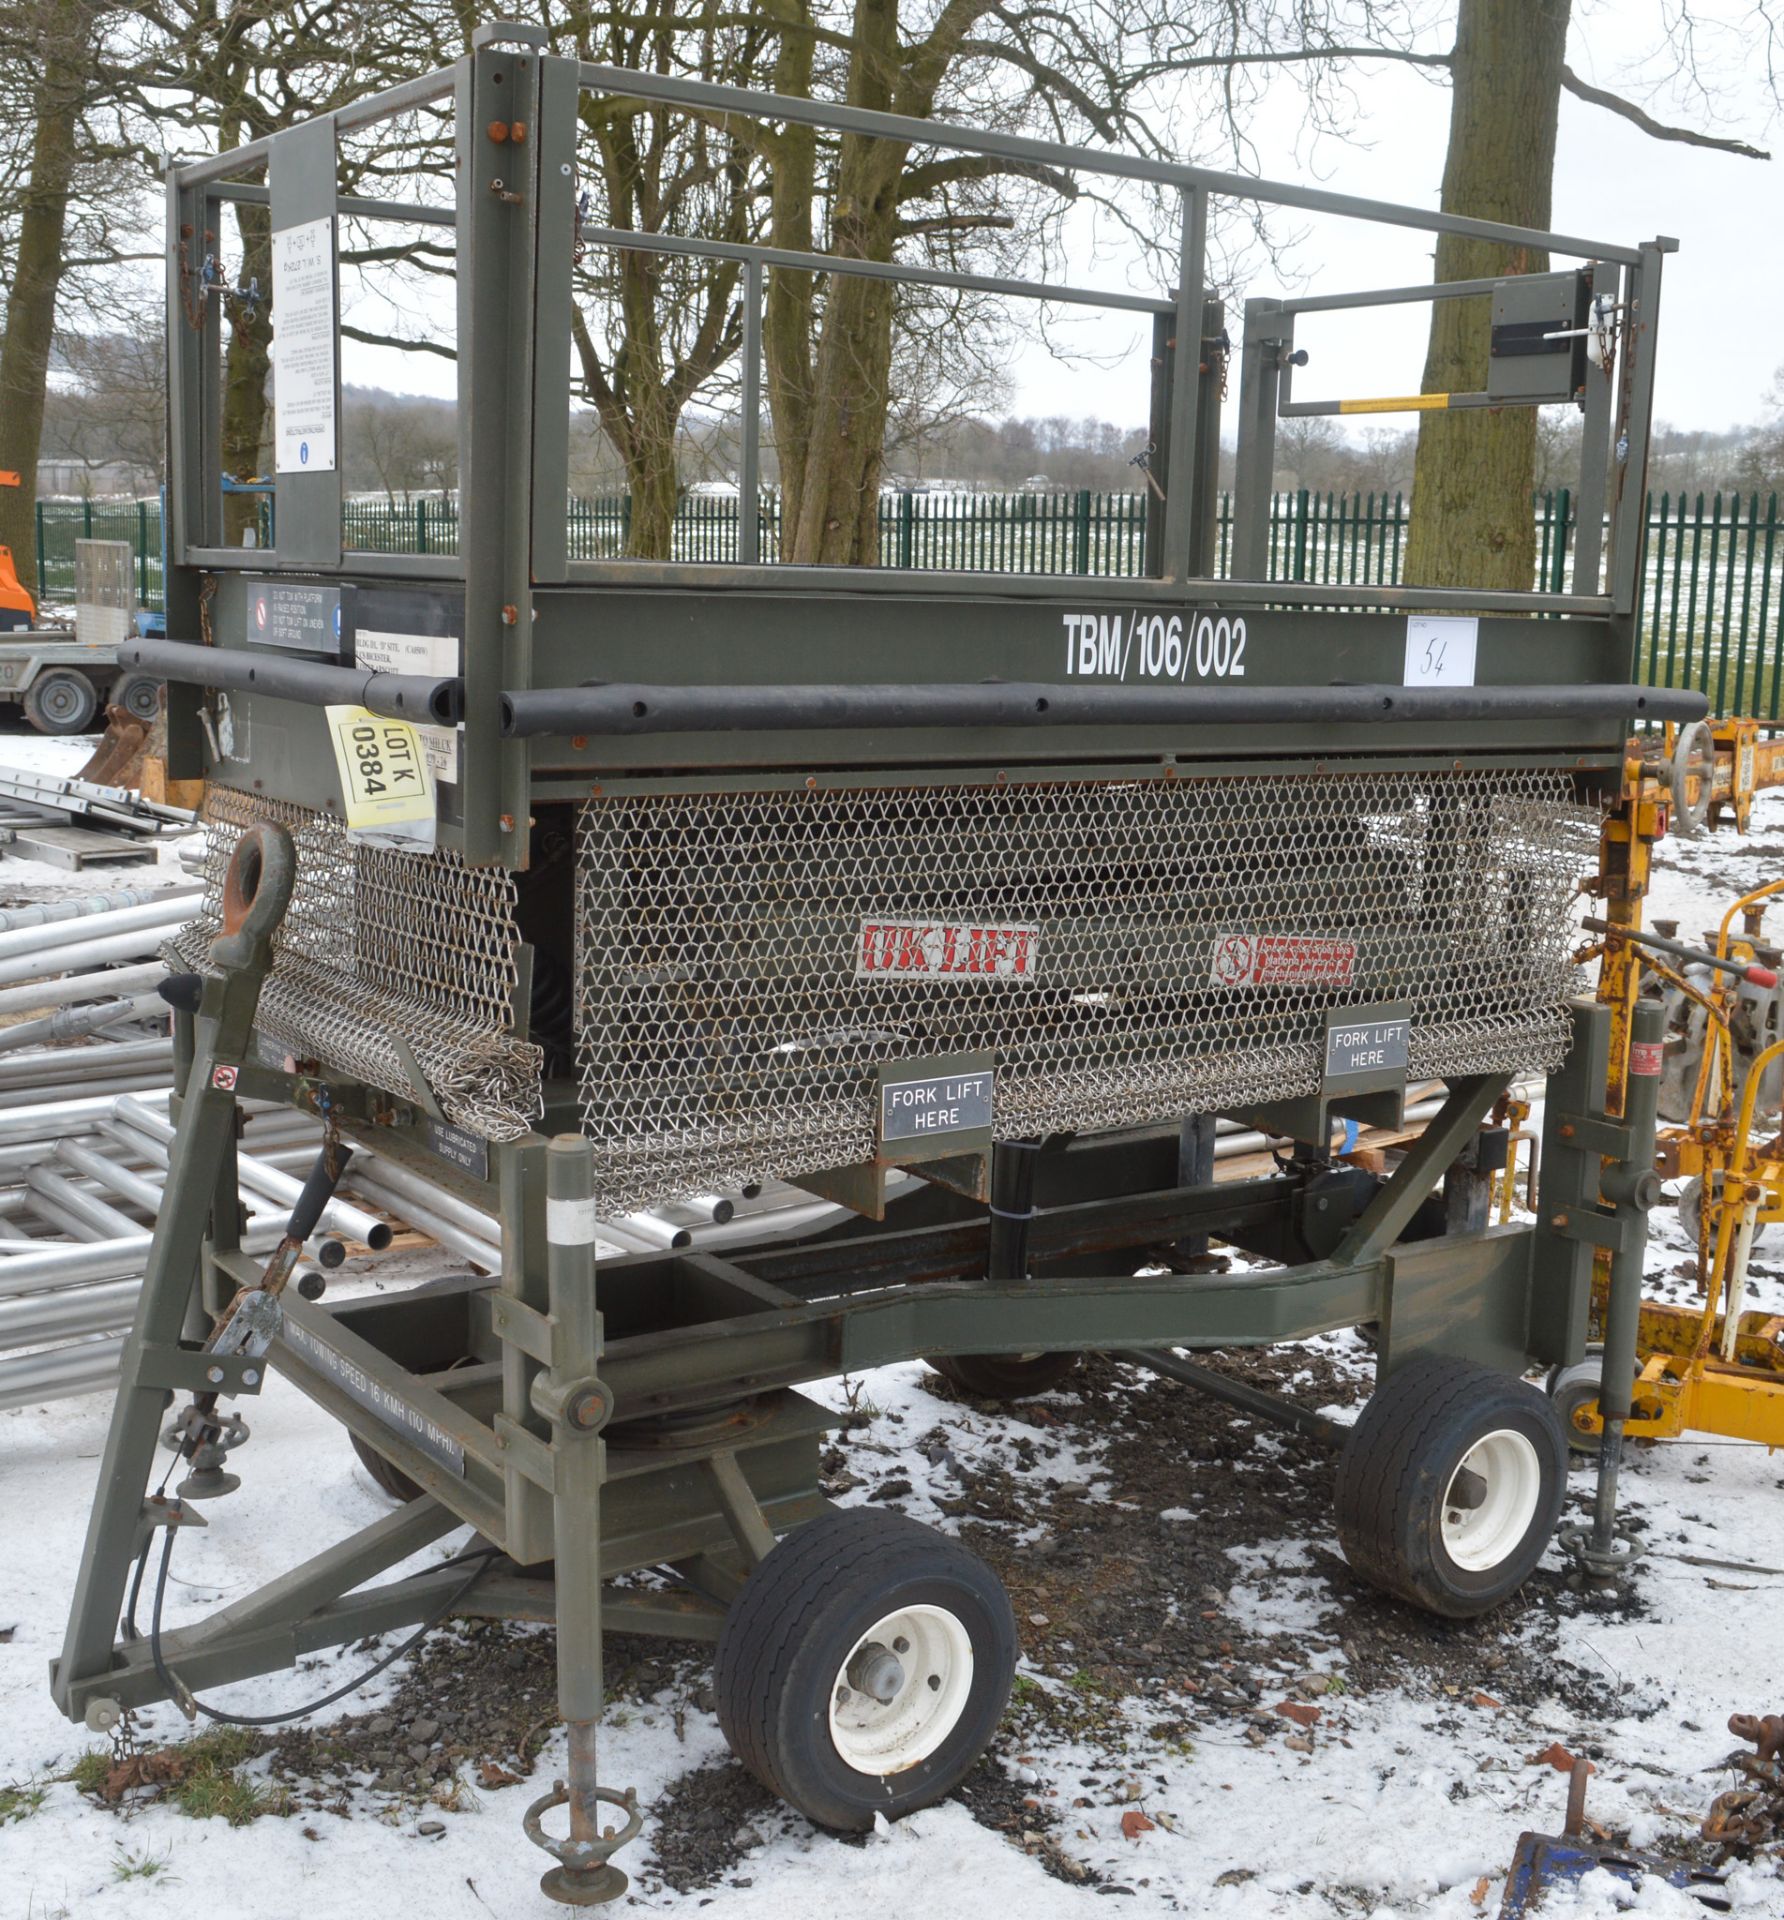 UK Lift manual hydraulic site tow mobile access platform (Ex MOD) - Image 3 of 3